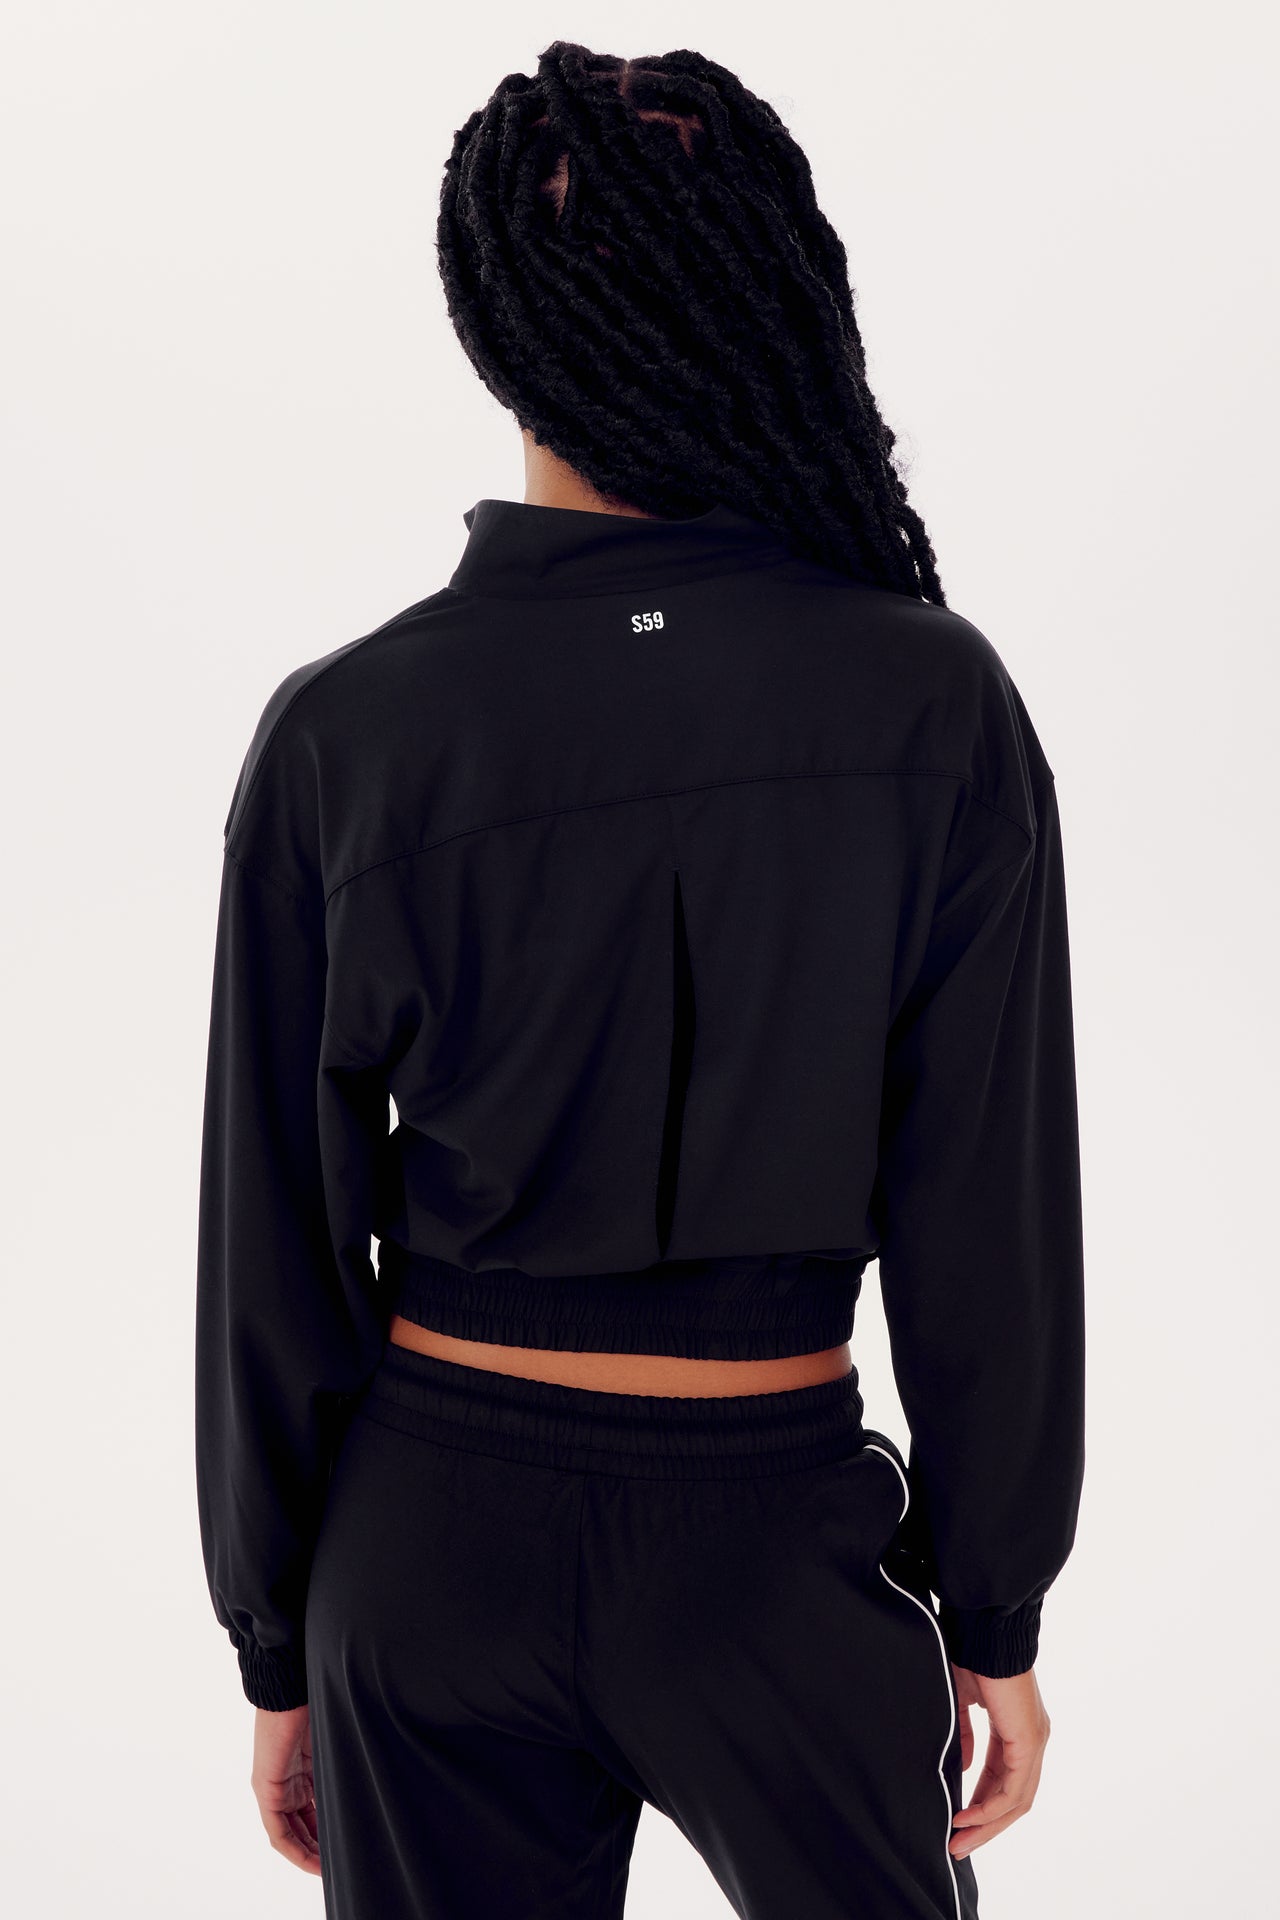 A person seen from the back wearing a SPLITS59 Harlowe Rigor Jacket in Black and black pants with a logo at the upper back. The person has long braided hair.